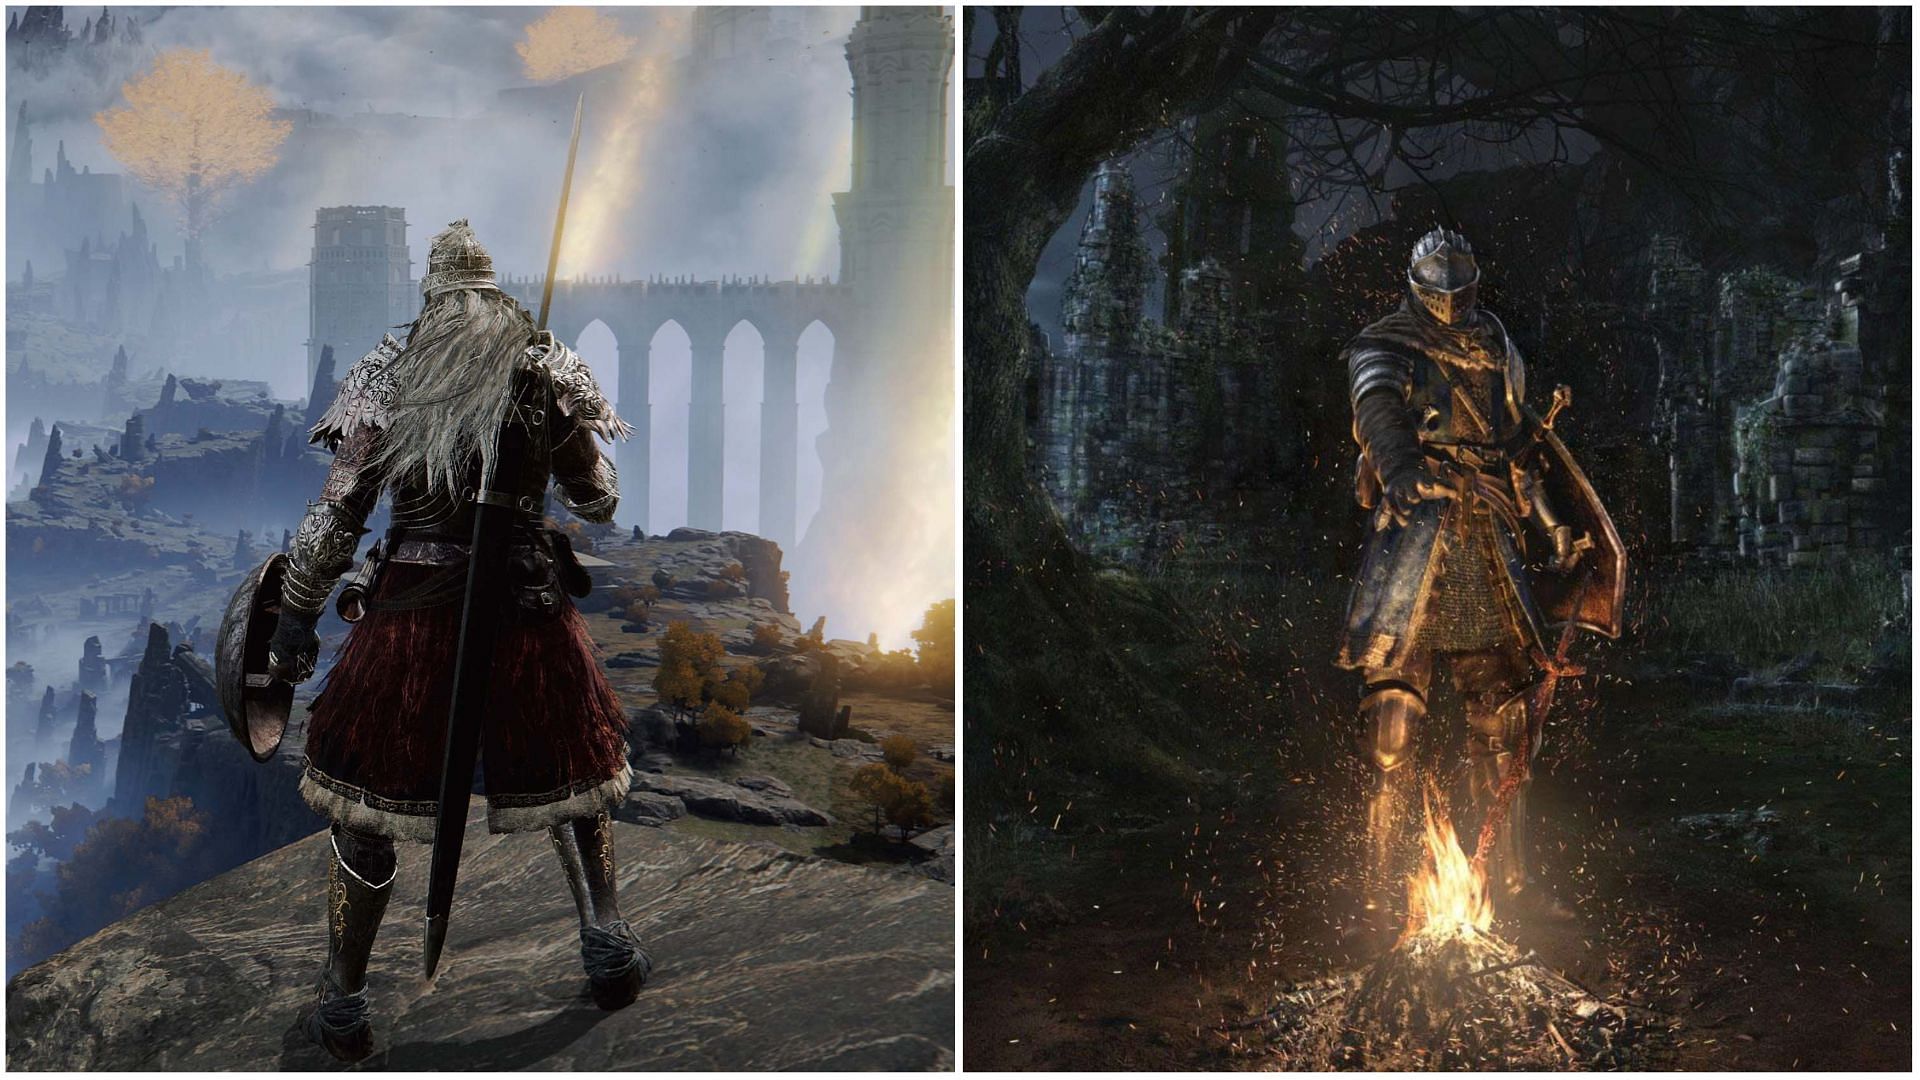 Is Elden Ring just another Dark Souls or something more?